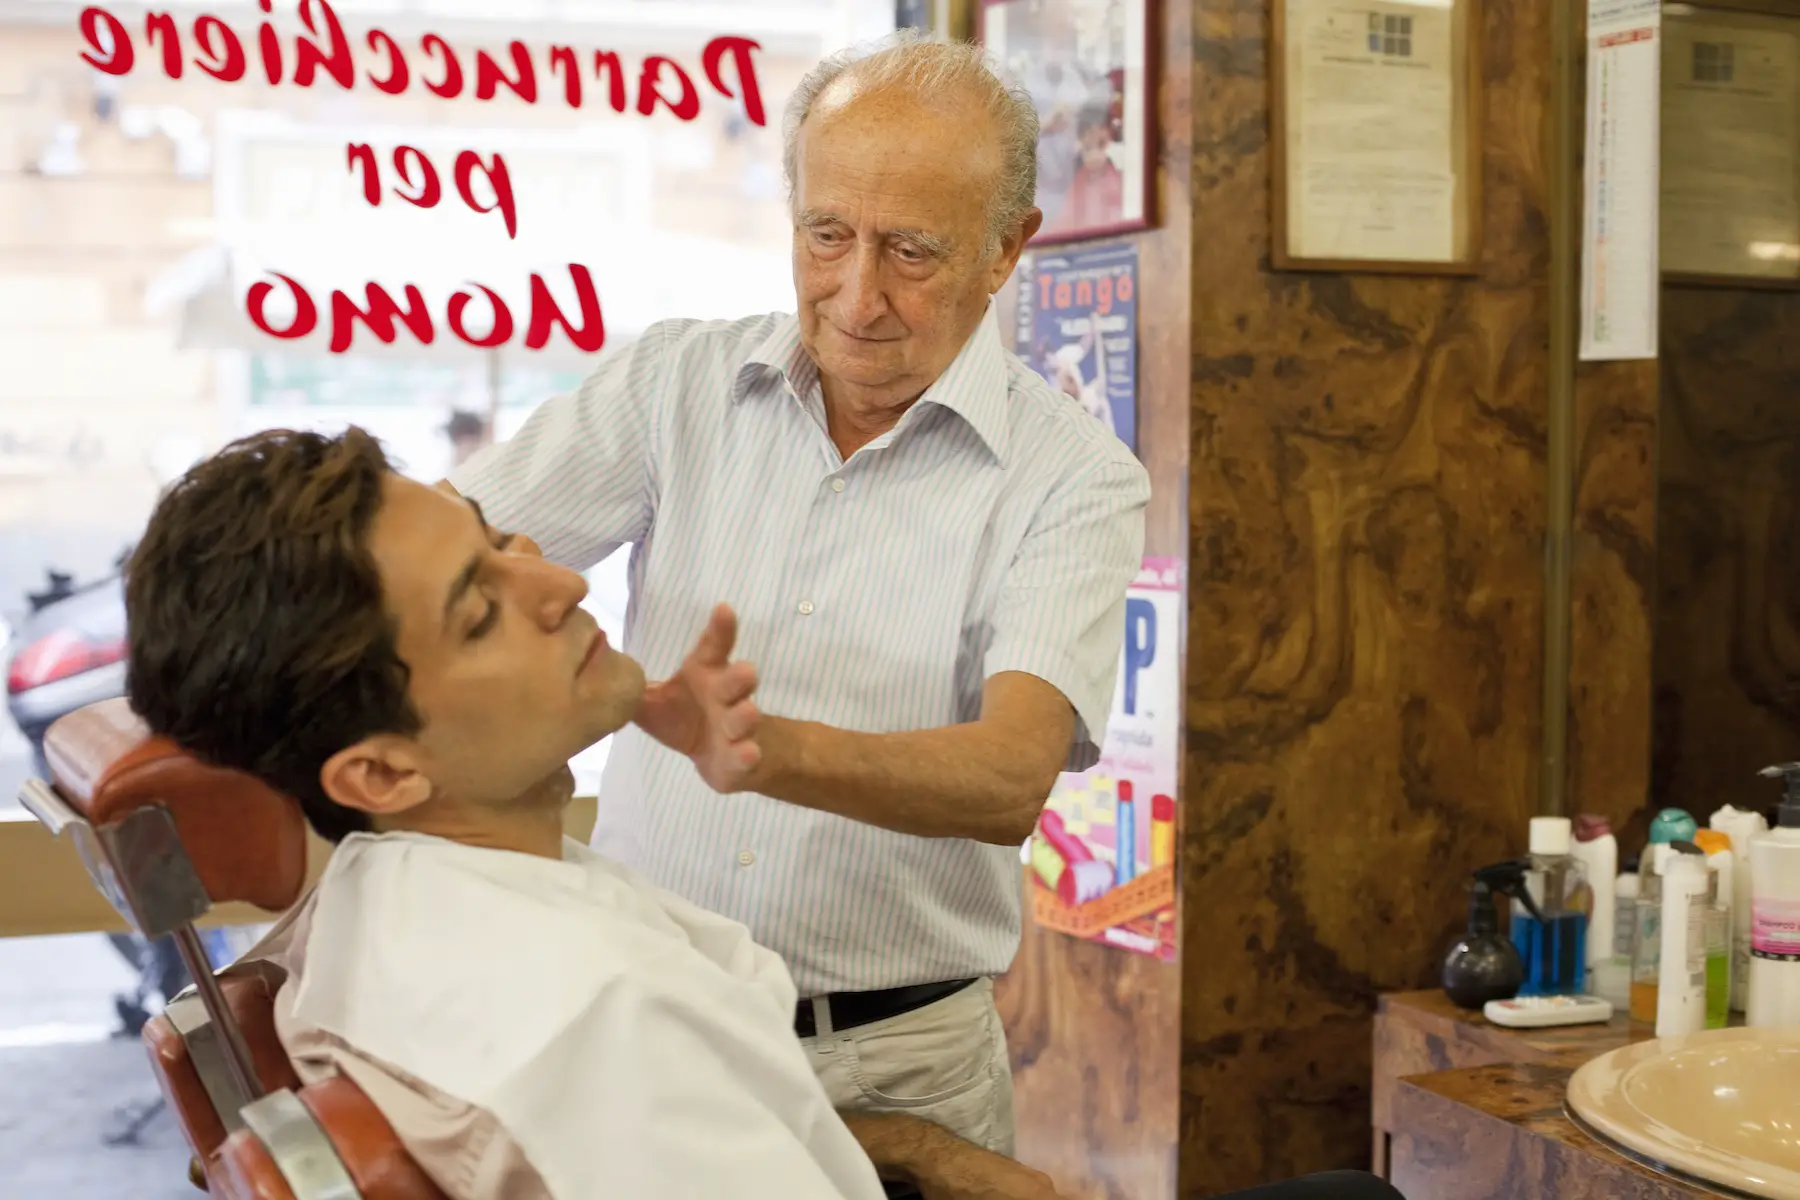 A young man gets a traditional shave from an older man at a classic barber shop in Rome; his professional license is displayed on the wall.